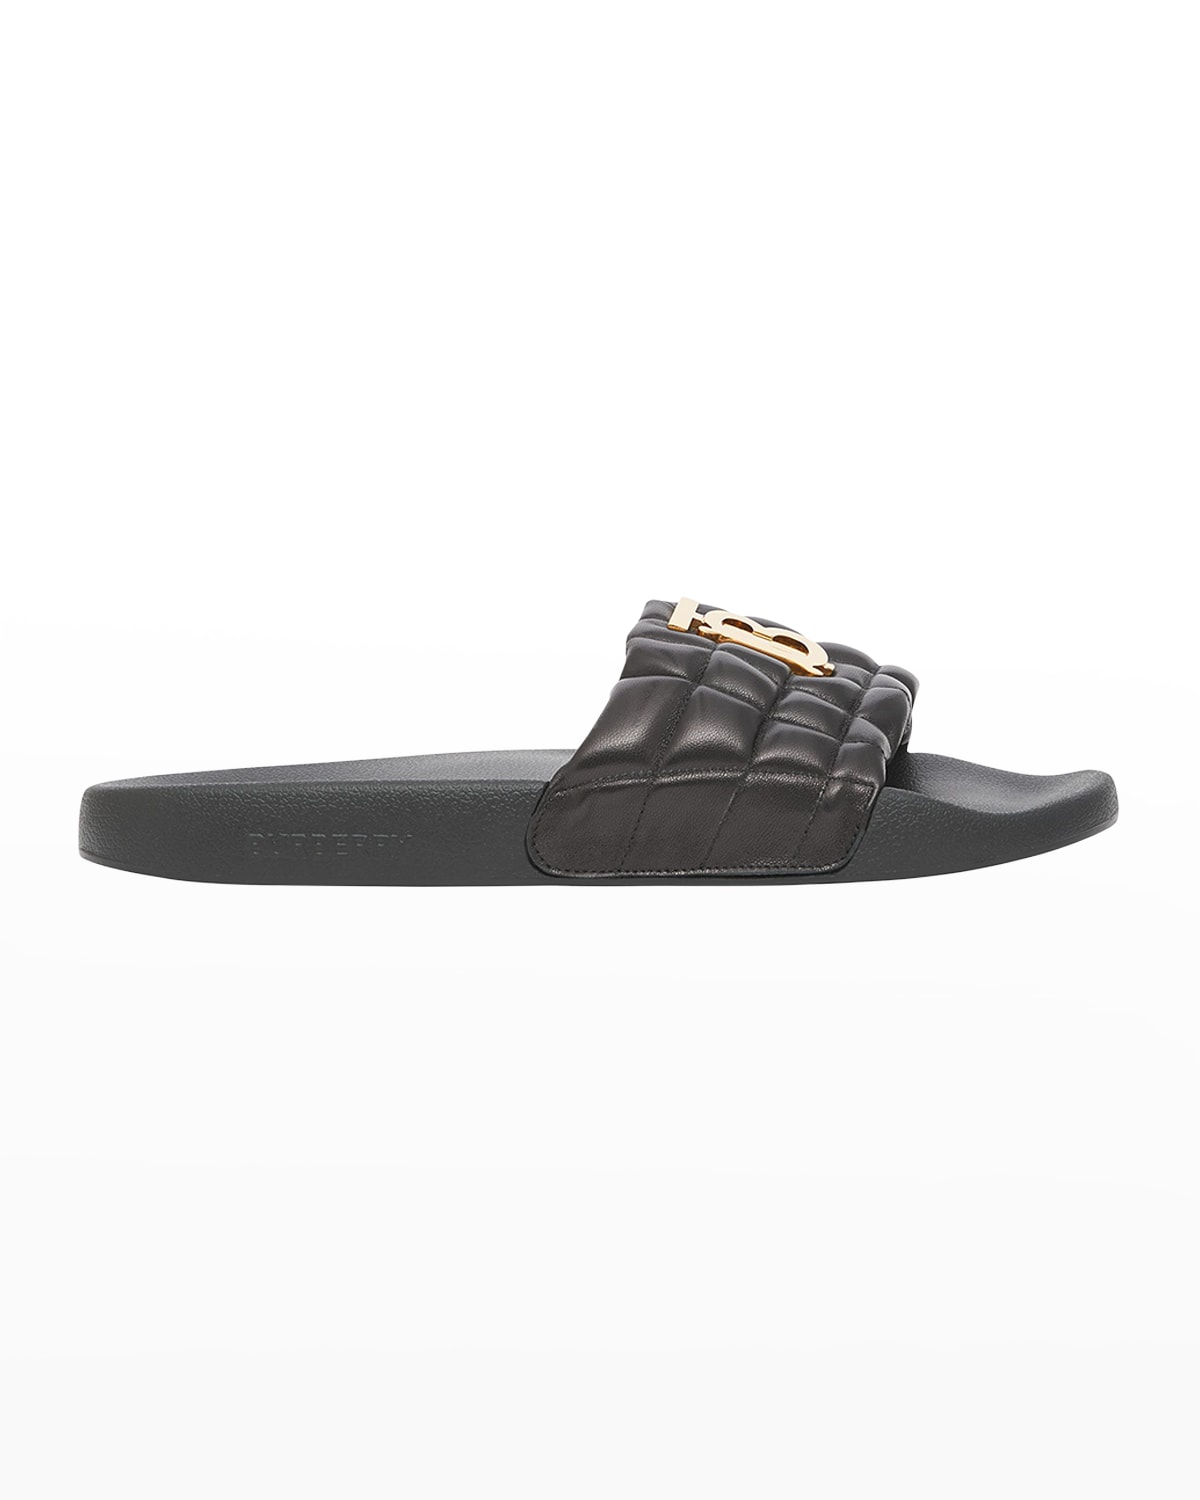 Burberry Furley TB Quilted Pool Slide Sandals